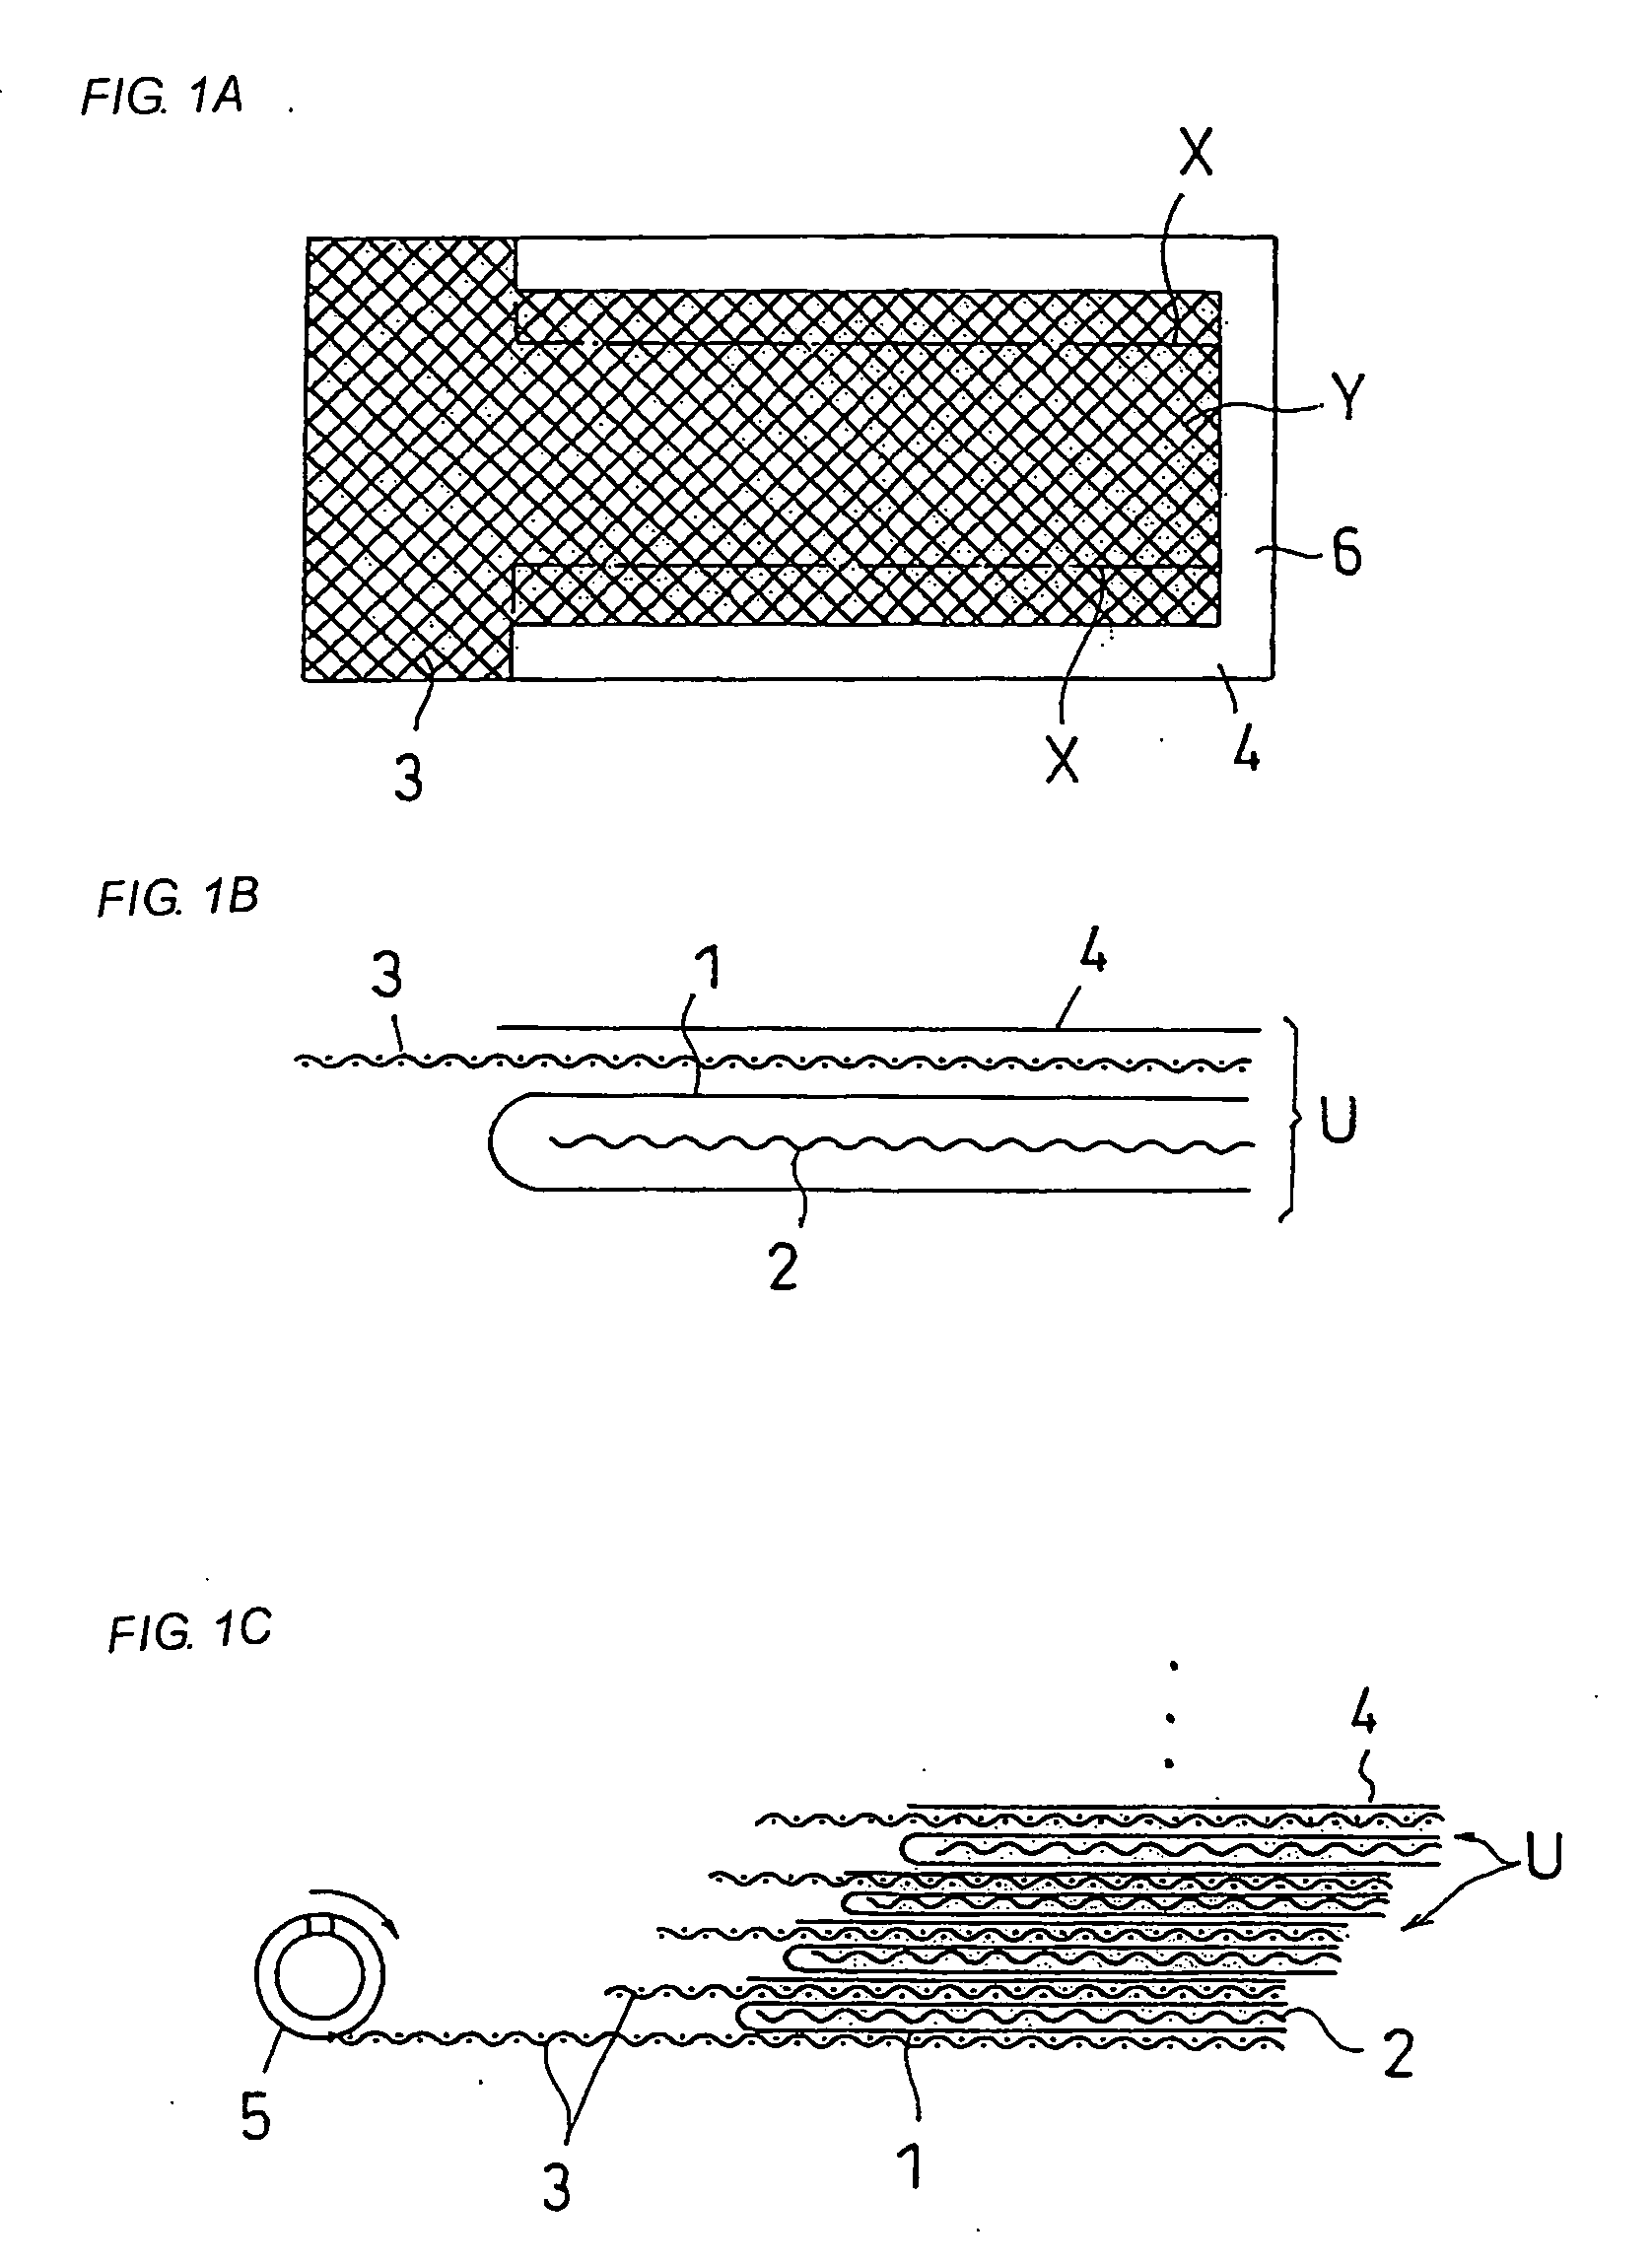 Spiral reverse osmosis membrane element, method of manufacturing the same, and its use method